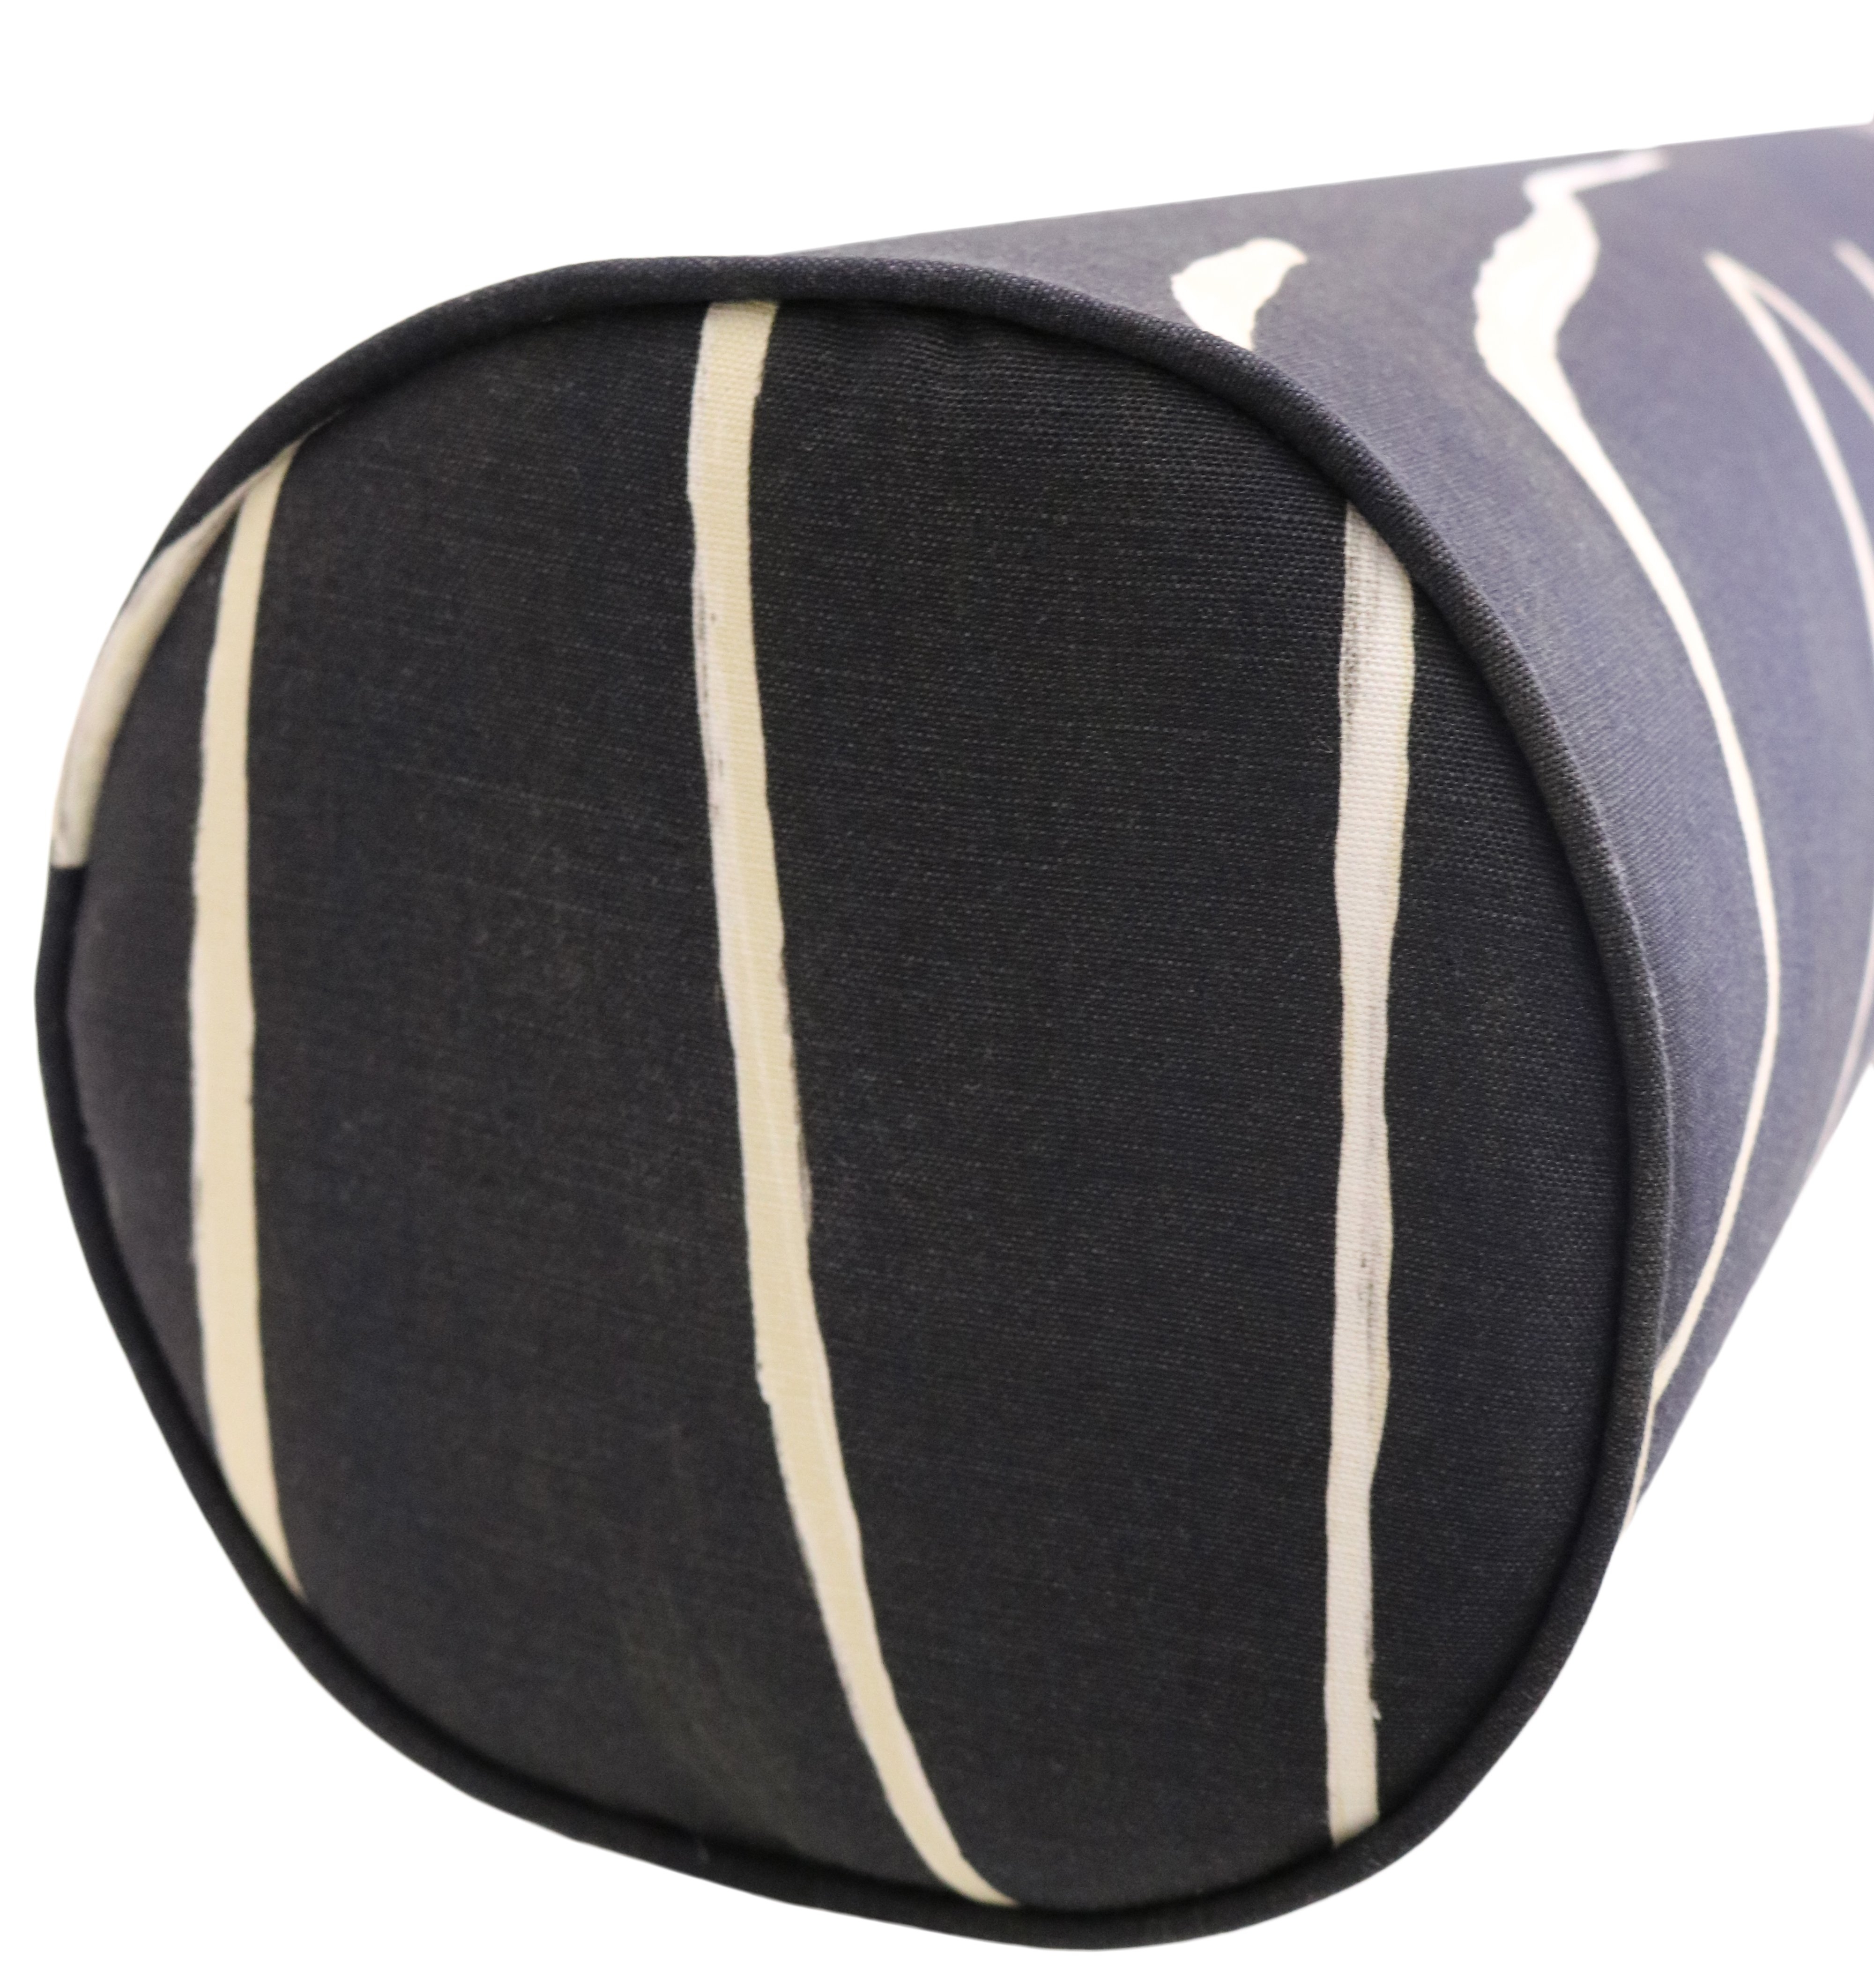 THE BOLSTER :: LABYRINTH LINEN // SPA BLUE - KING // 9" X 48" - Image 5